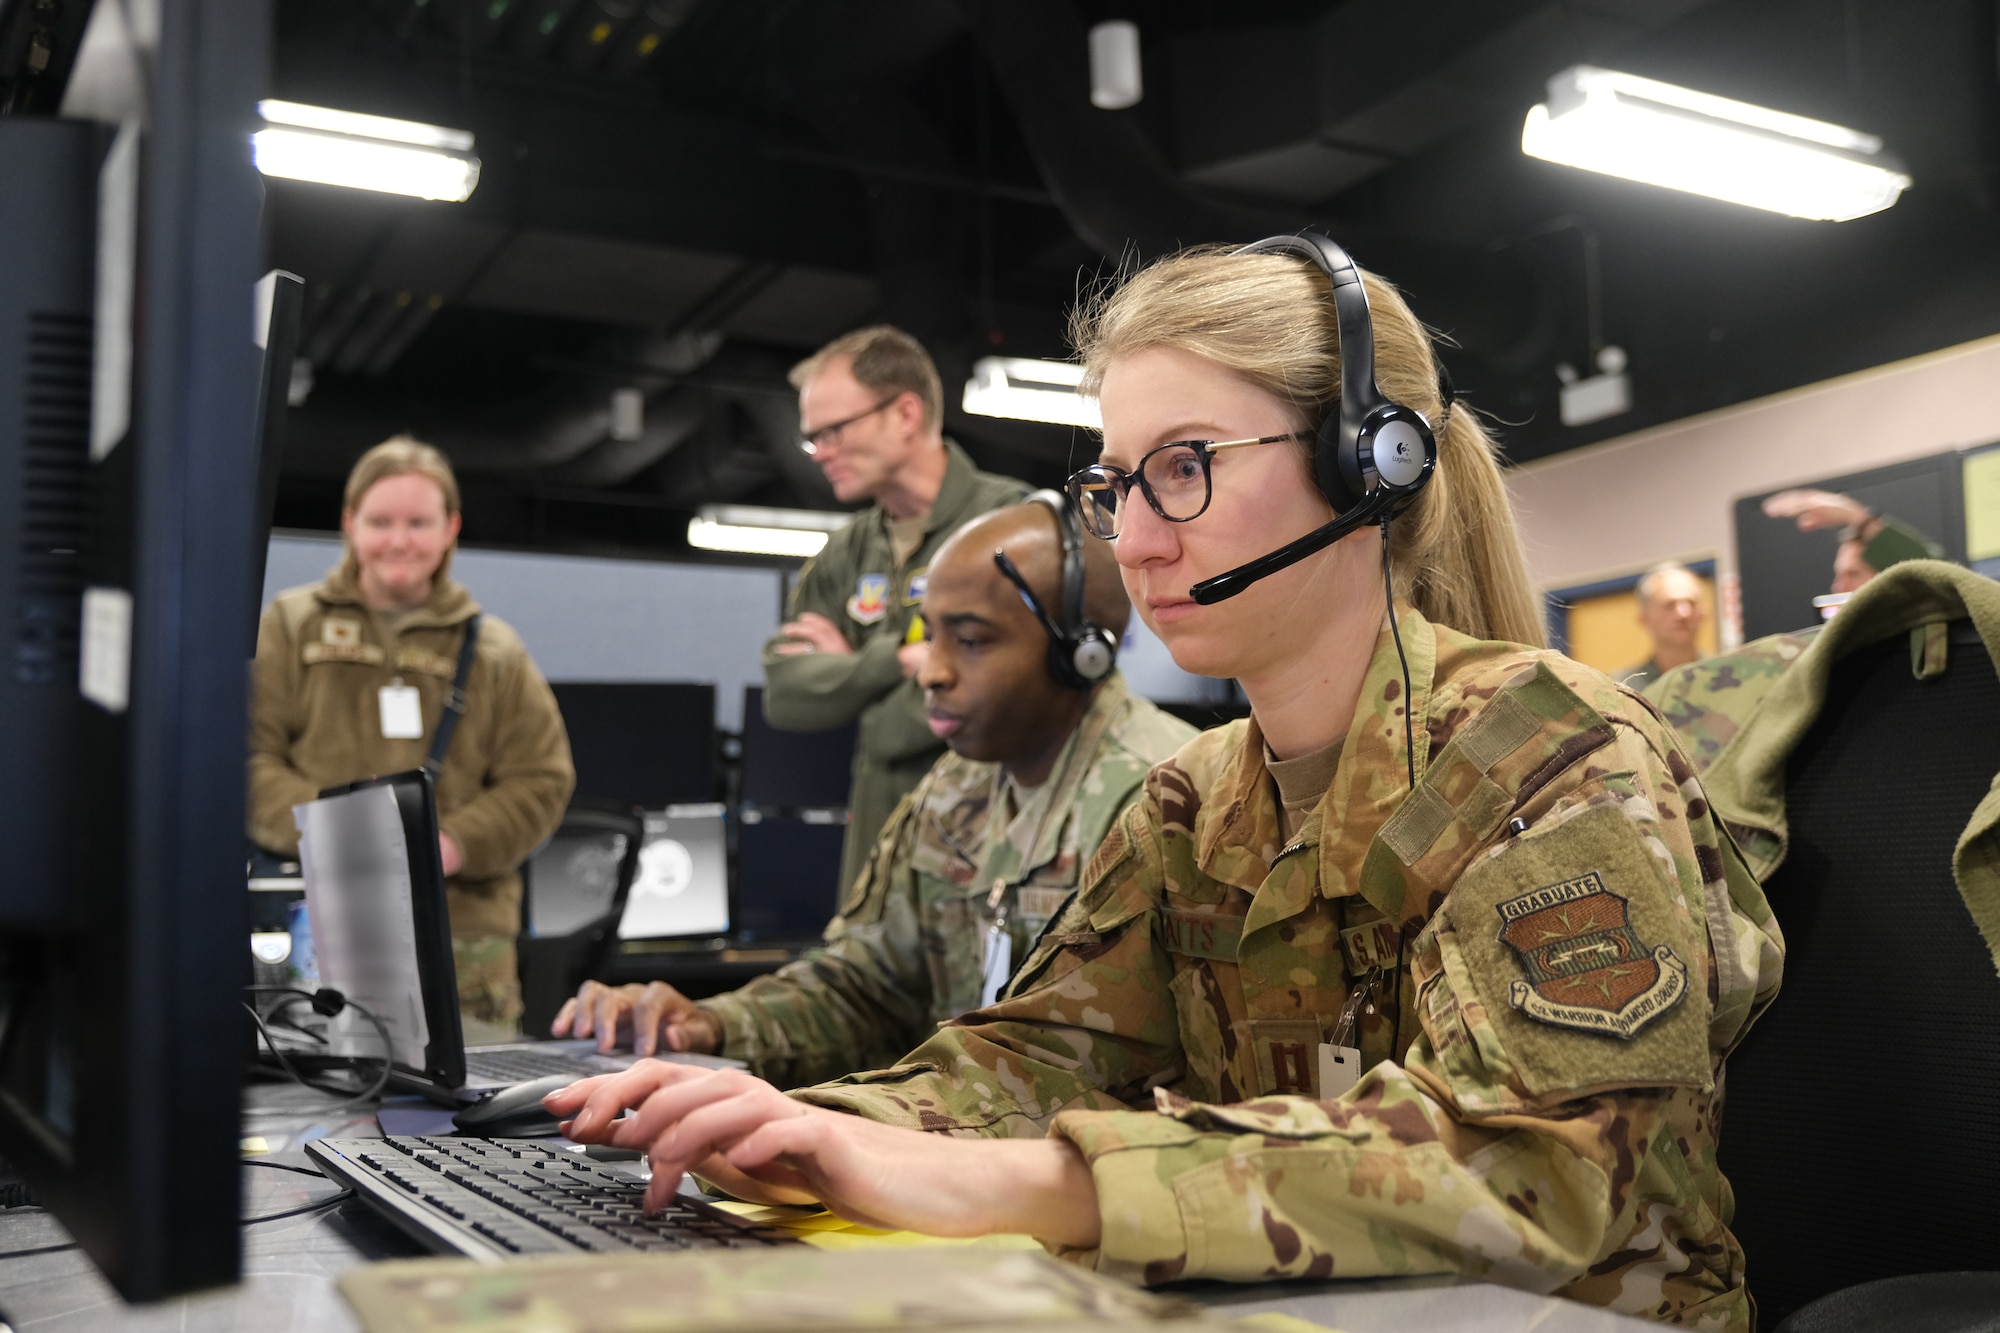 uniformed U.S. Air Force Airmen work at computers in the background are multiple computer screens